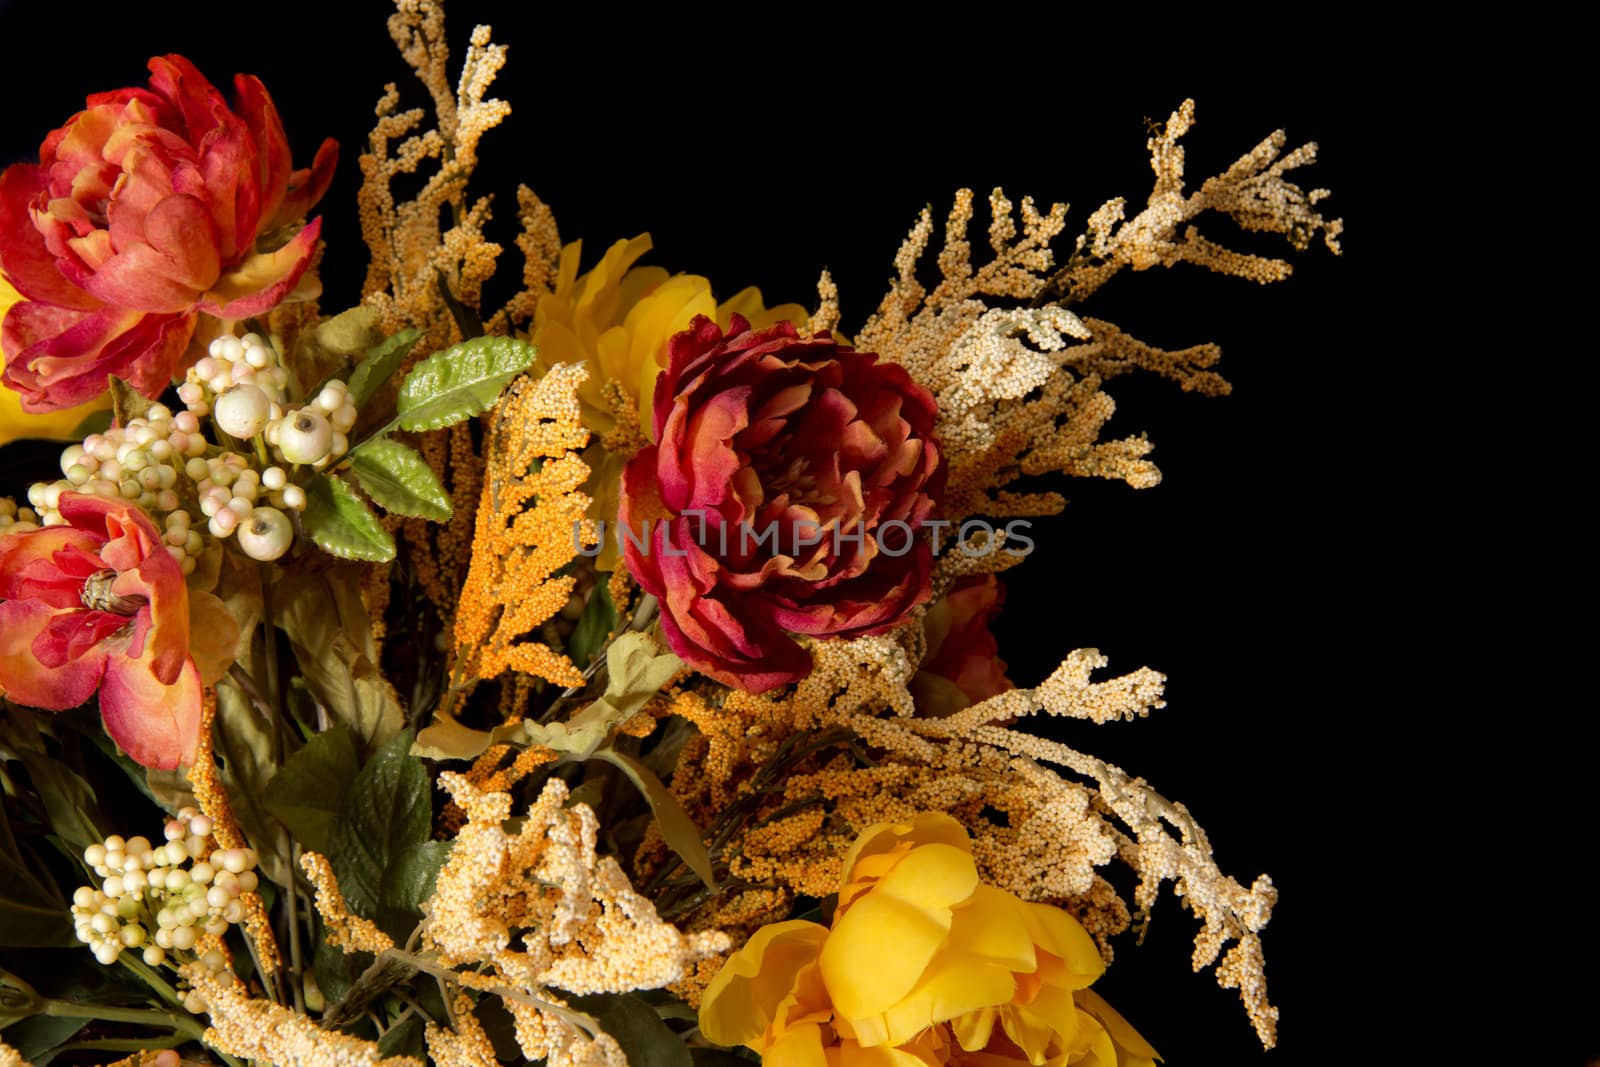 A low key photograph of a bunch of artificial flowers on a black background